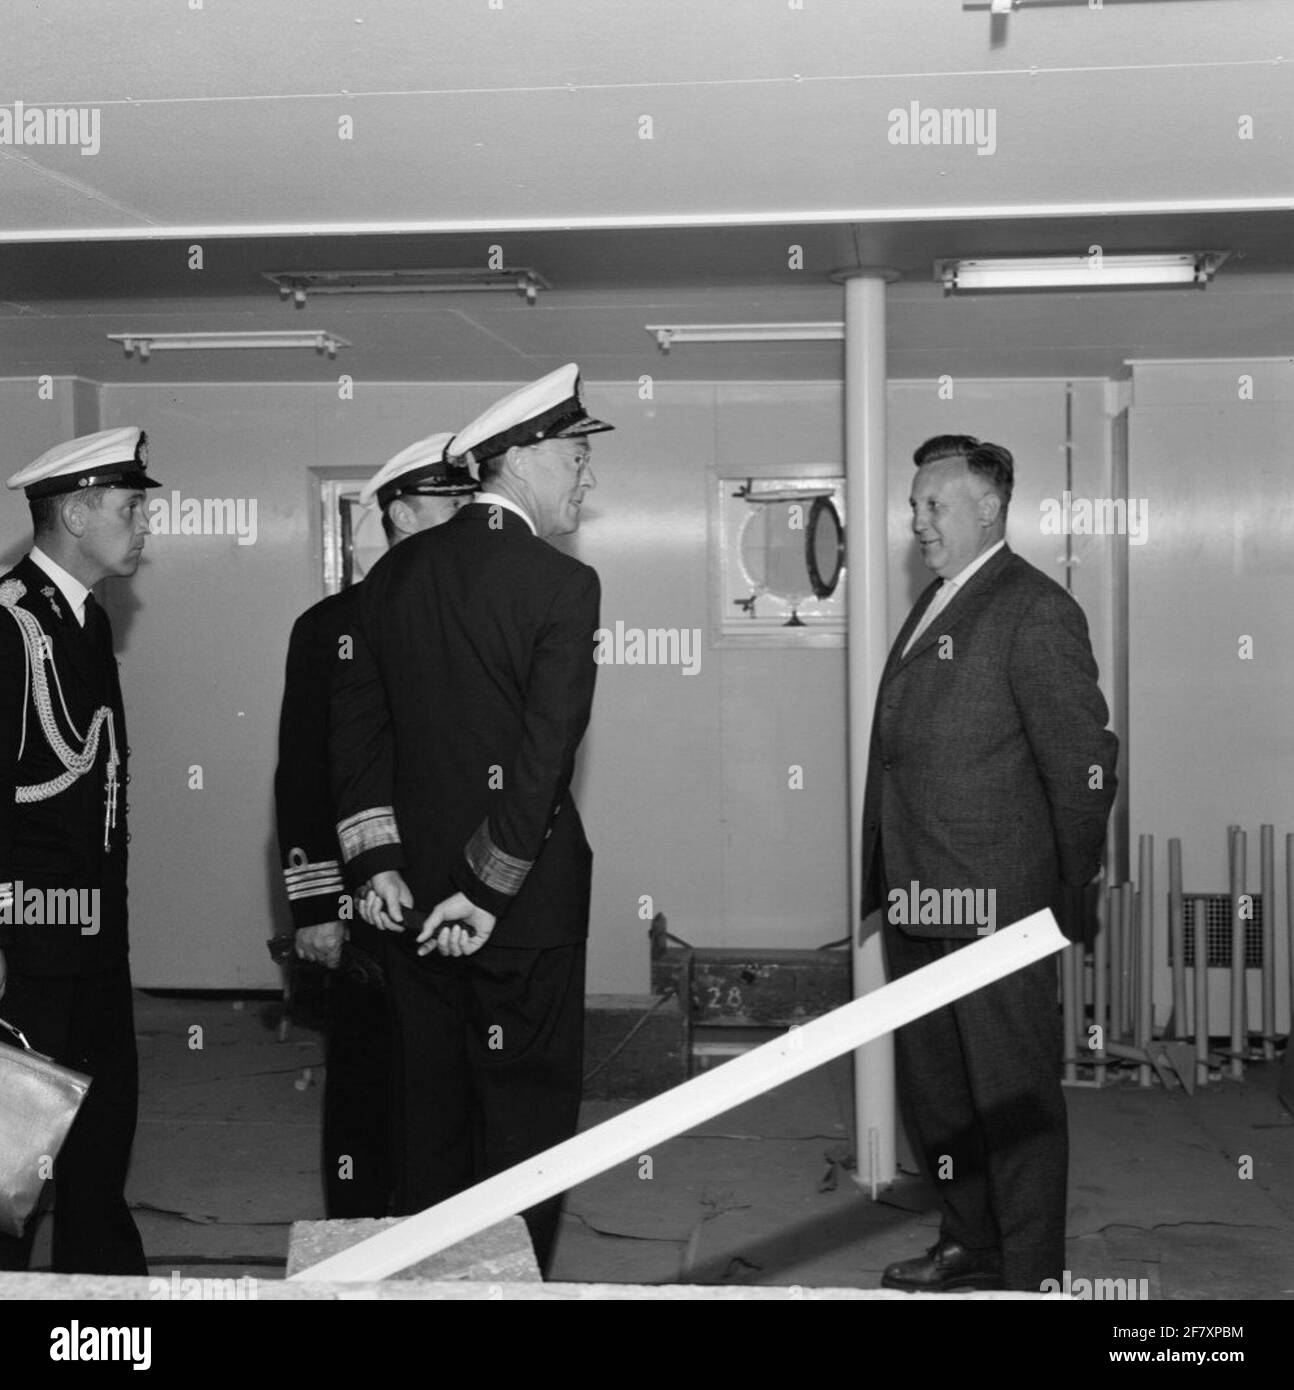 Prince Bernhard, in his position as Inspector General of the Armed Forces (IGK) and in the Uniform of Lieutenant Admiral (LTADM), visit the Rotterdamsche Droogdok Maatschappij (RDM) at the Heijplaat in Rotterdam. The seven provinces (Zipprov) (C 802) and the pool star (A 835), the supply ship for the Royal Netherlands Marine (KM), which after the commissioning as Harer Majesteits (Hr.Ms.) will go into the pool star. On board the pool star. Stock Photo